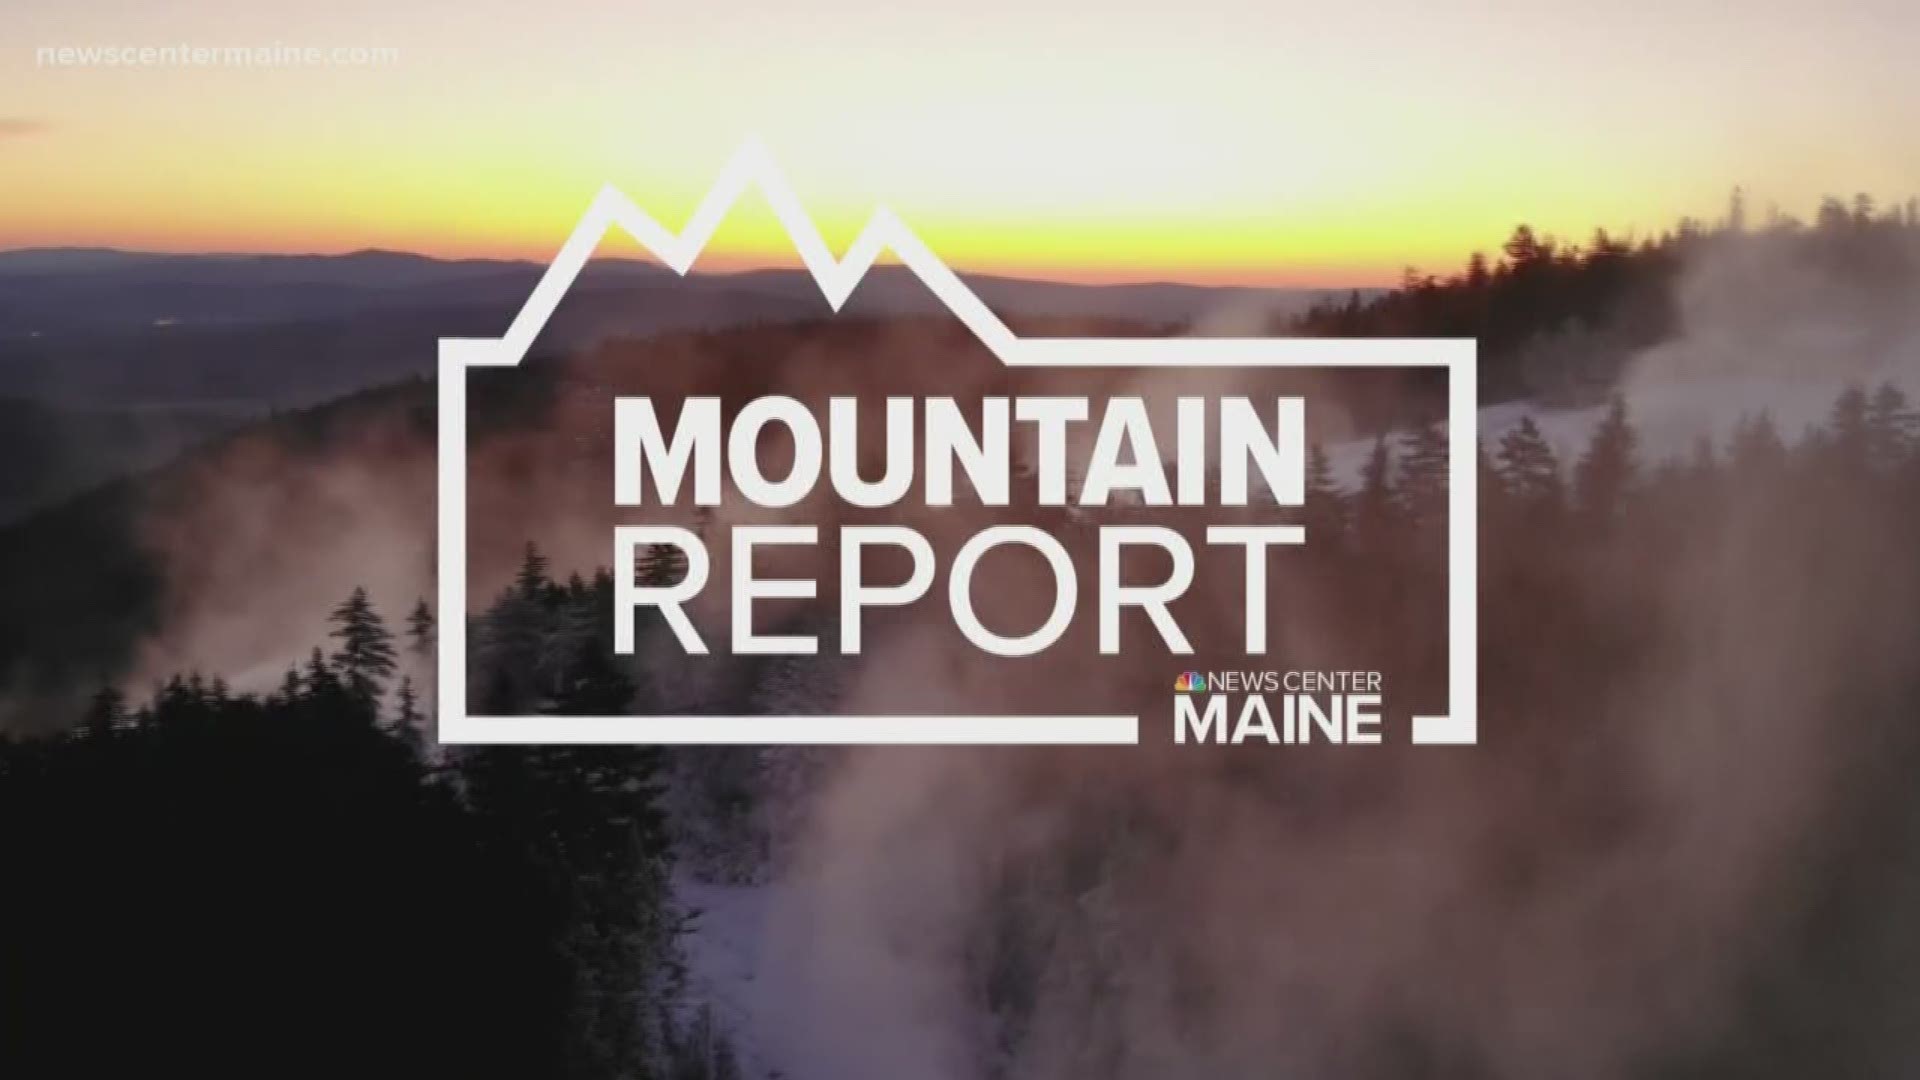 NEWS CENTER Maine's Weekend Mountain Report with Mallory Brooke.